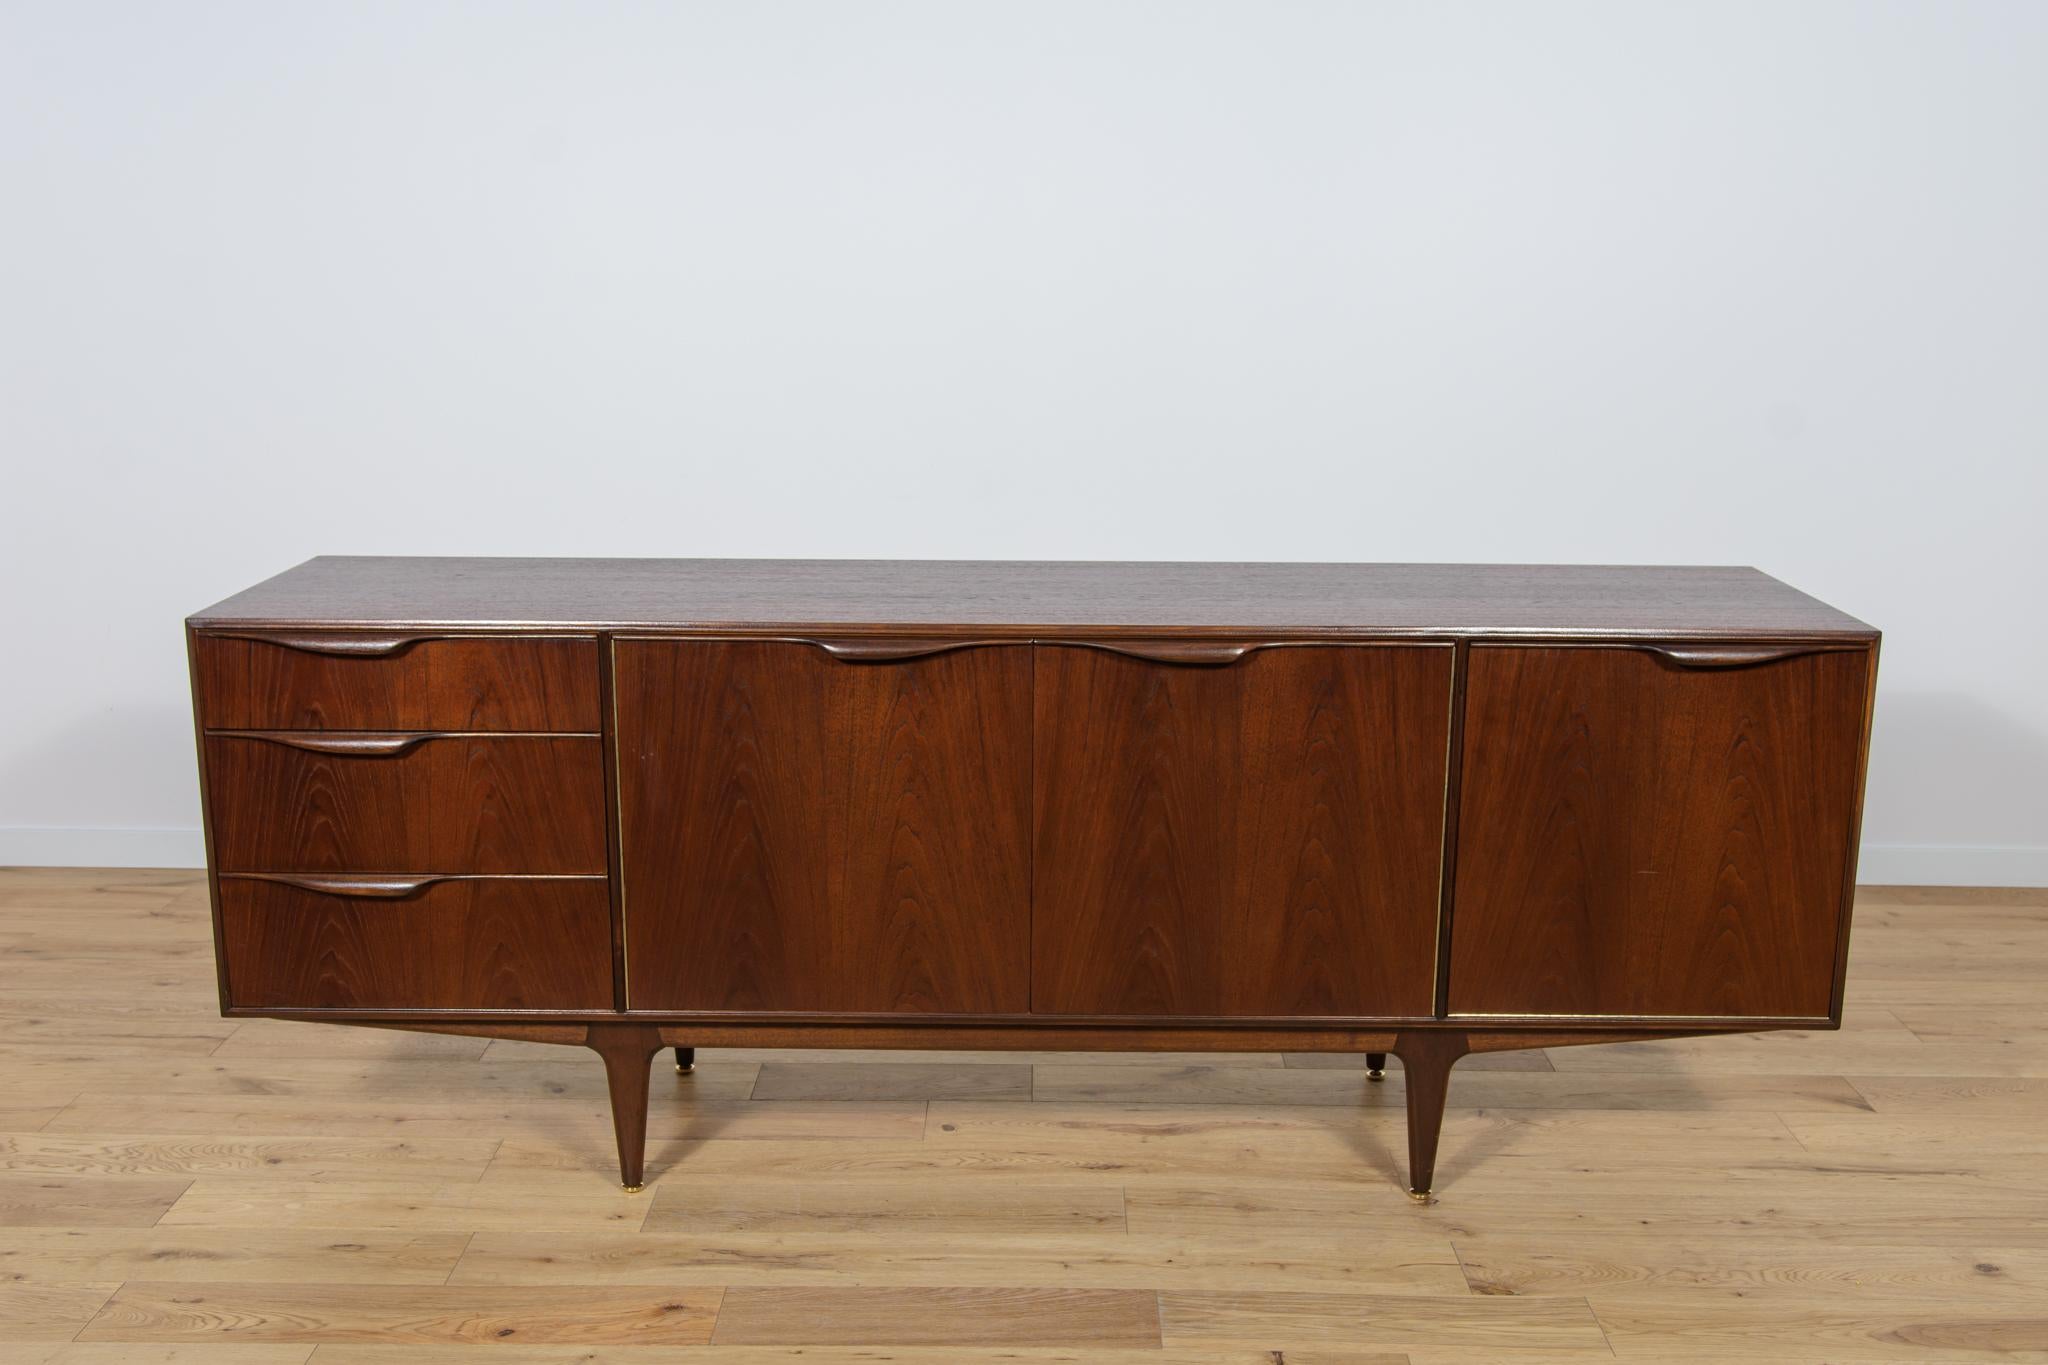 This mid-century sideboard in teak was produced in Great Britain by Mcintosh in the 1960s. The sideboard has three drawers and a cabinet, on the right side there is a bar with  pull-out top. Sideboard made of teak wood with profiled handles. The